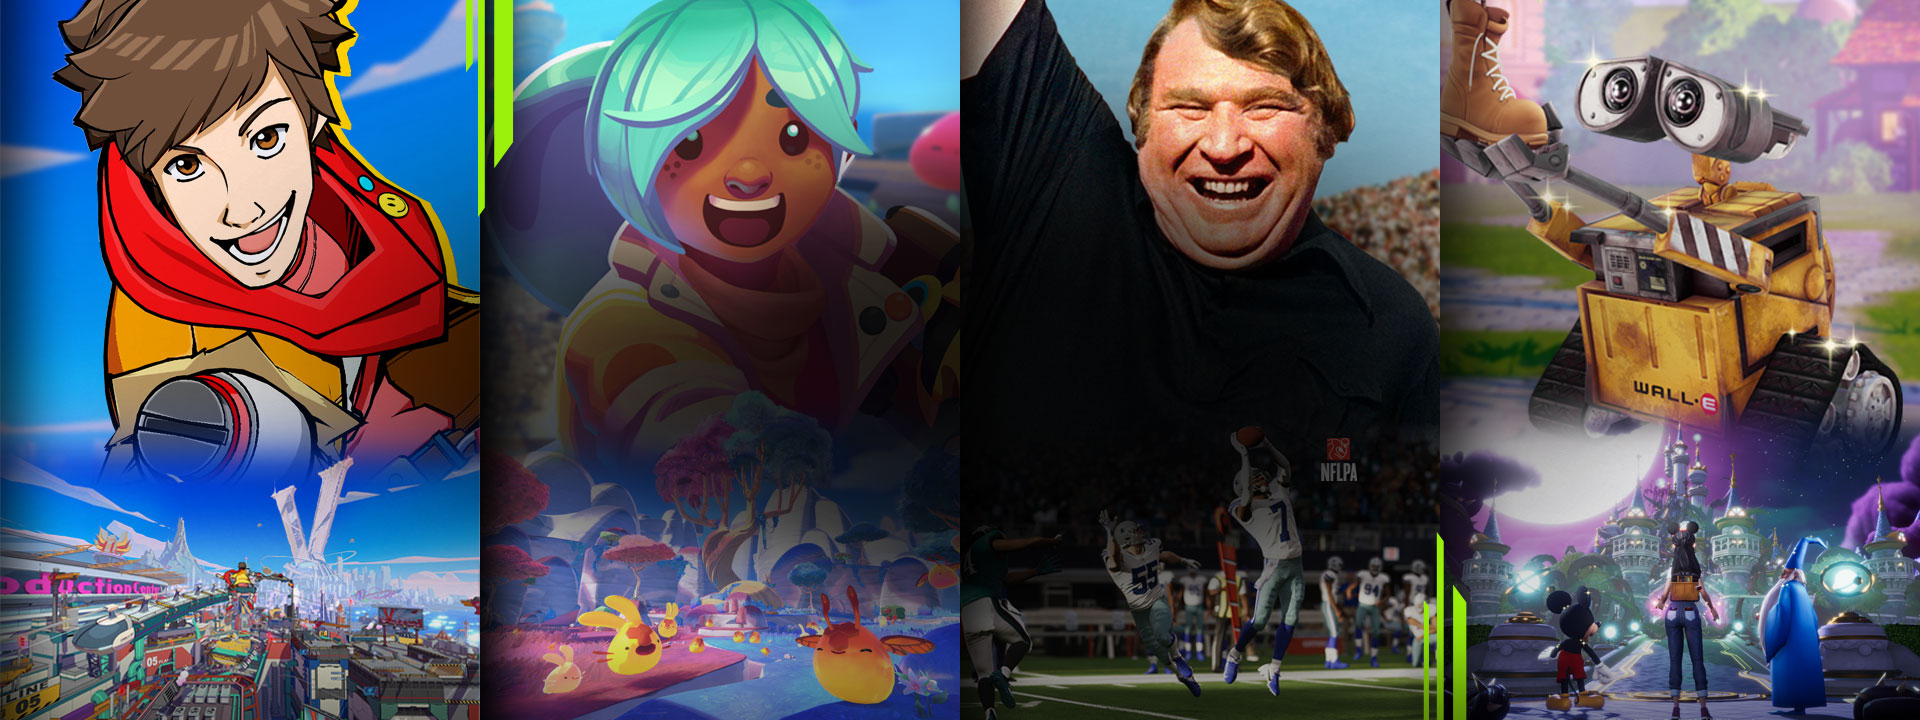 A selection of games available with Xbox Game Pass including Hi-Fi RUSH, Slime Rancher 2, Madden NFL 23, and Disney Dreamlight Valley.